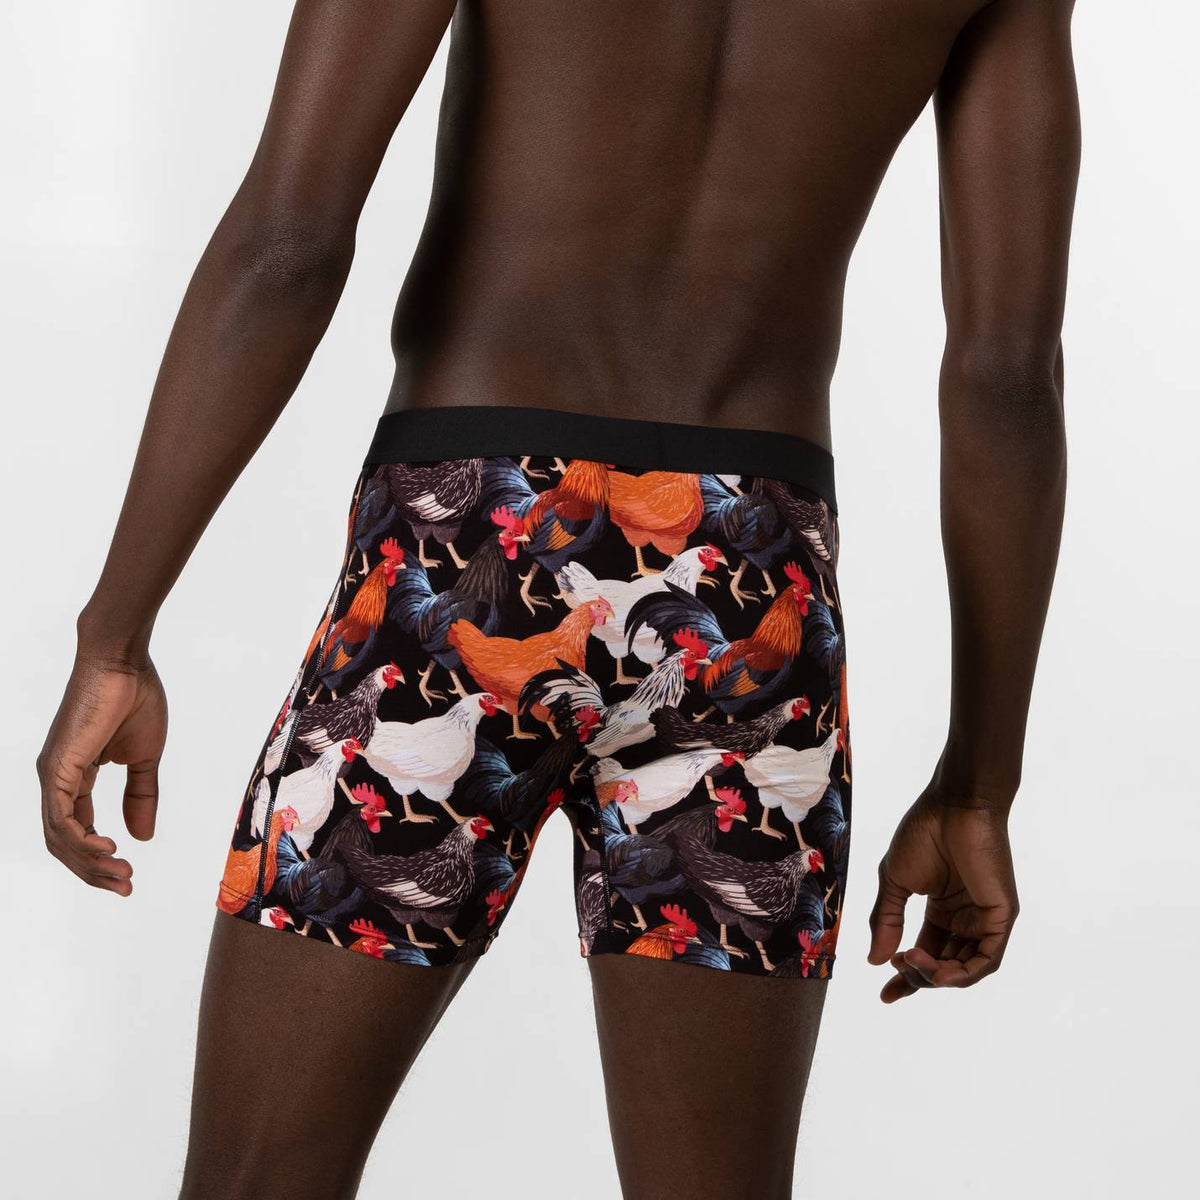 Men's Chickens and Roosters Underwear